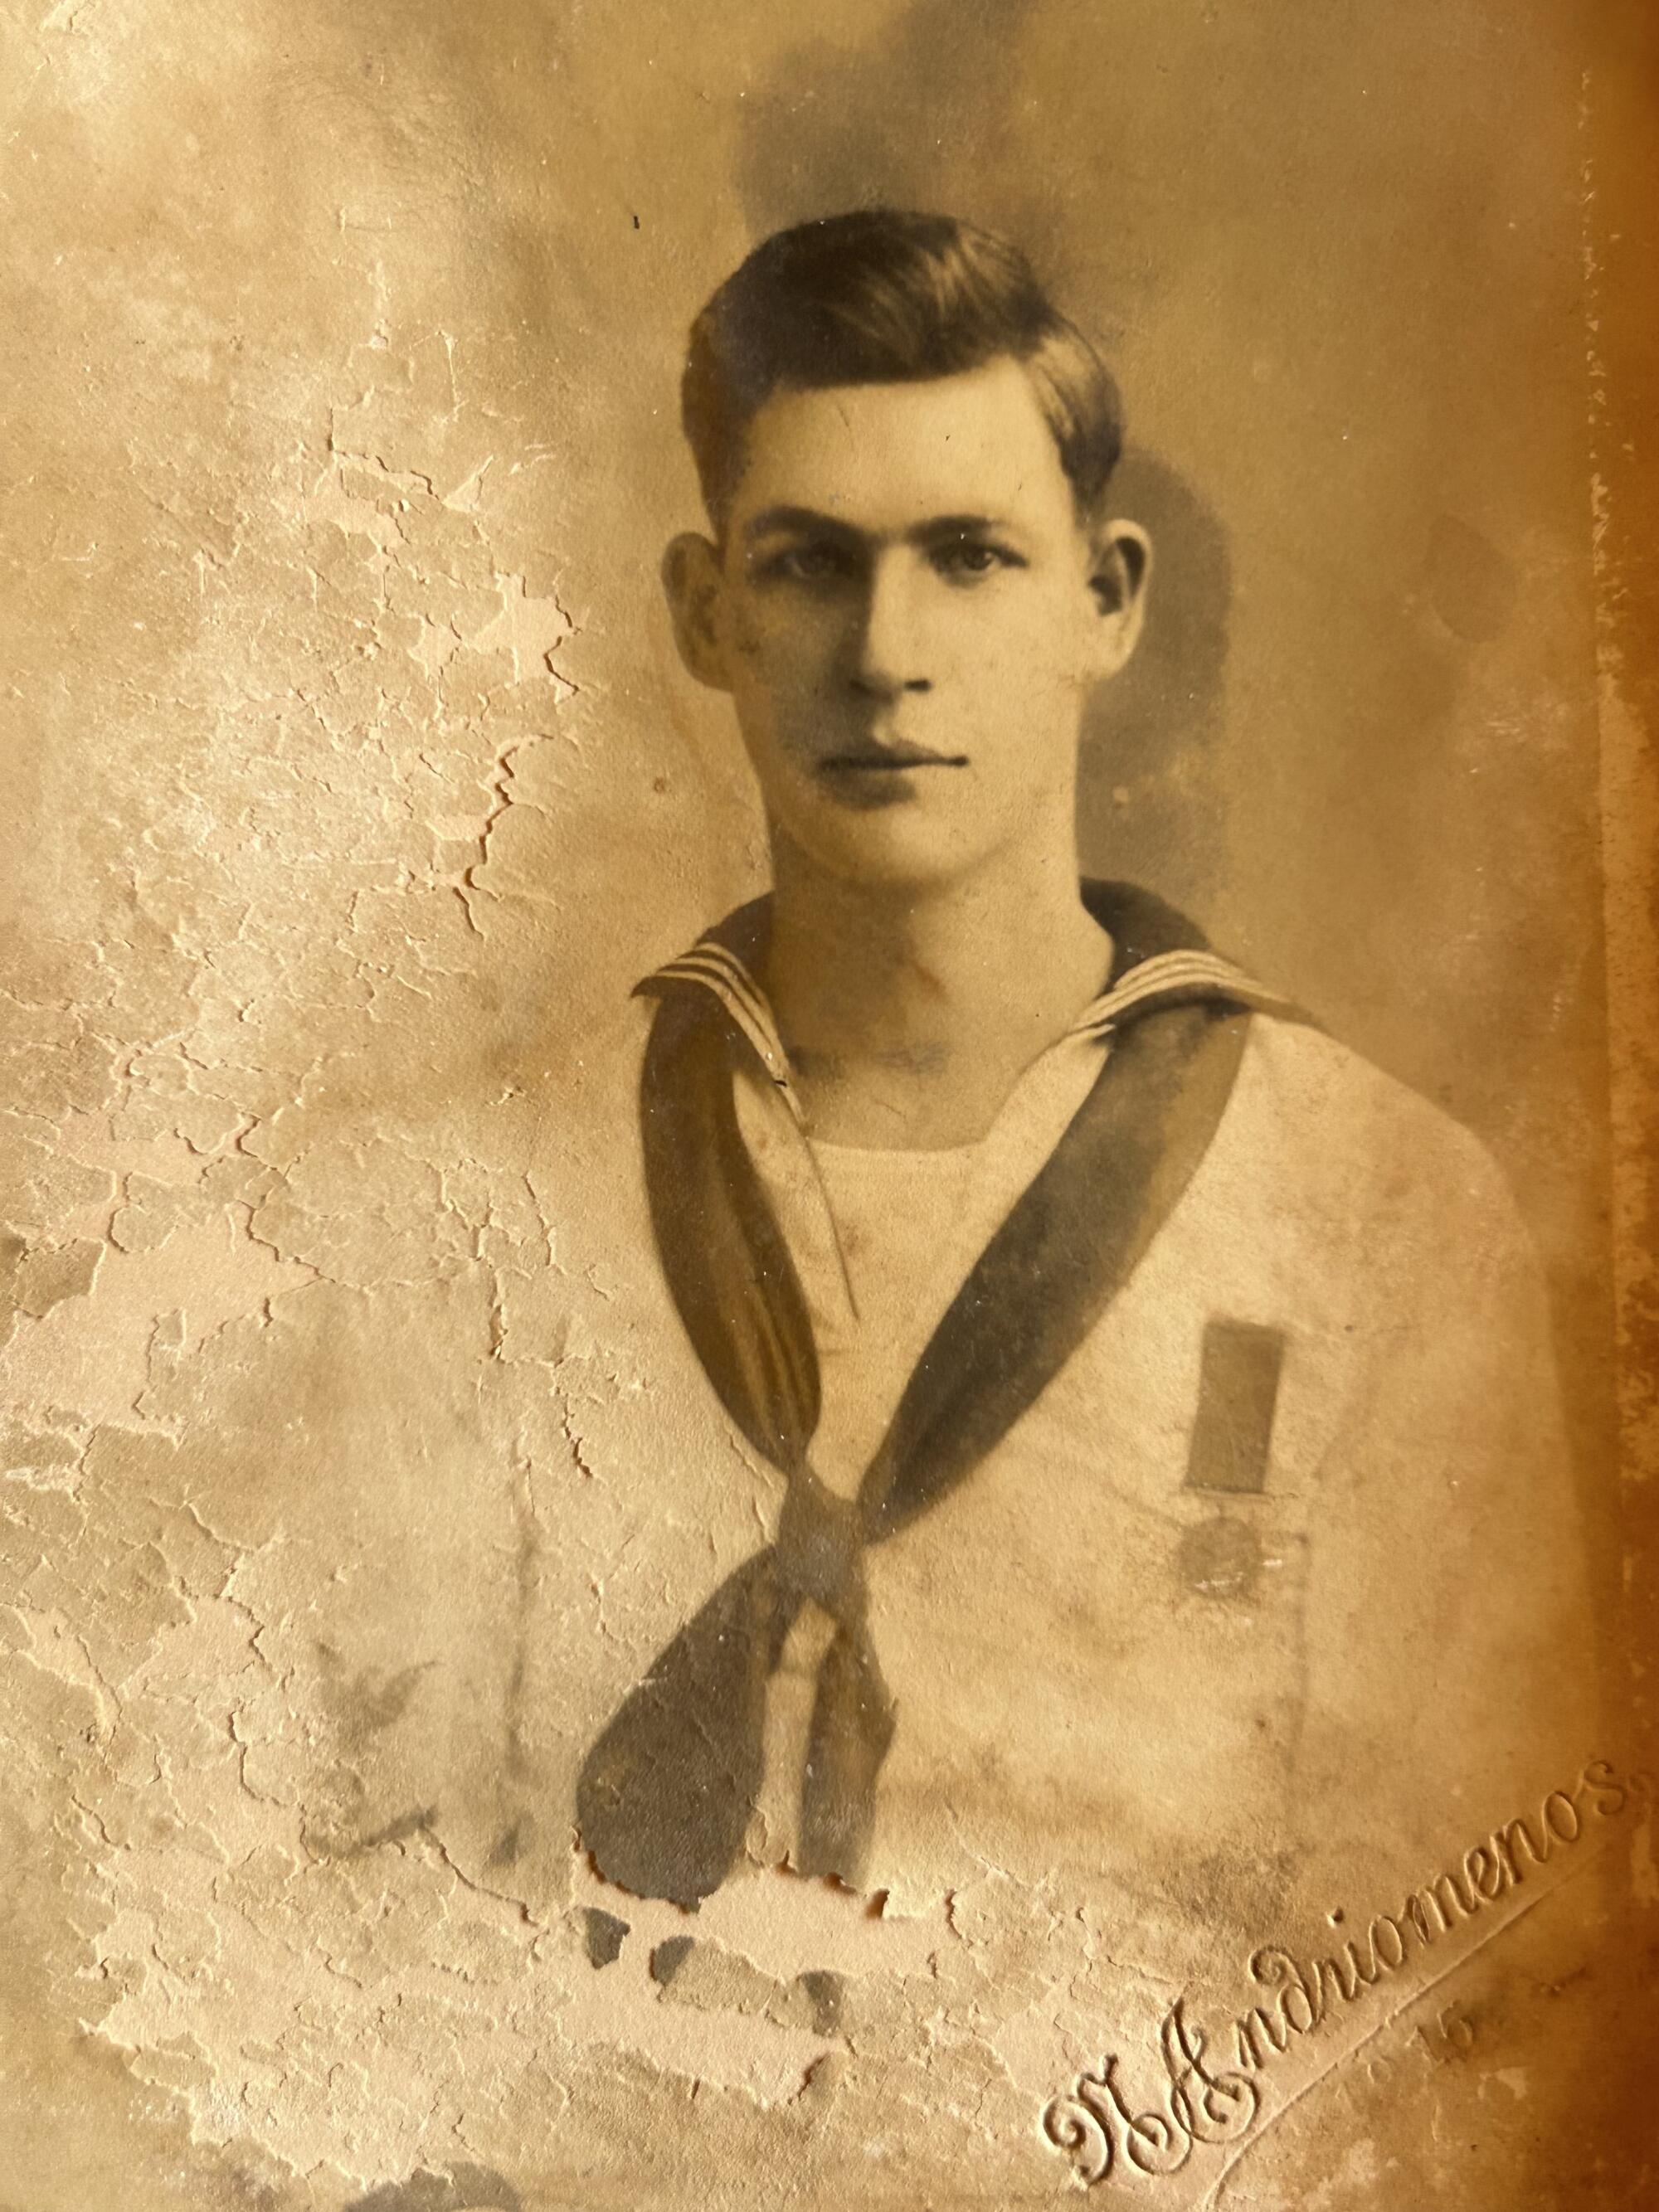 A sepia-tone portrait of a young man in an old-fashioned sailor suit